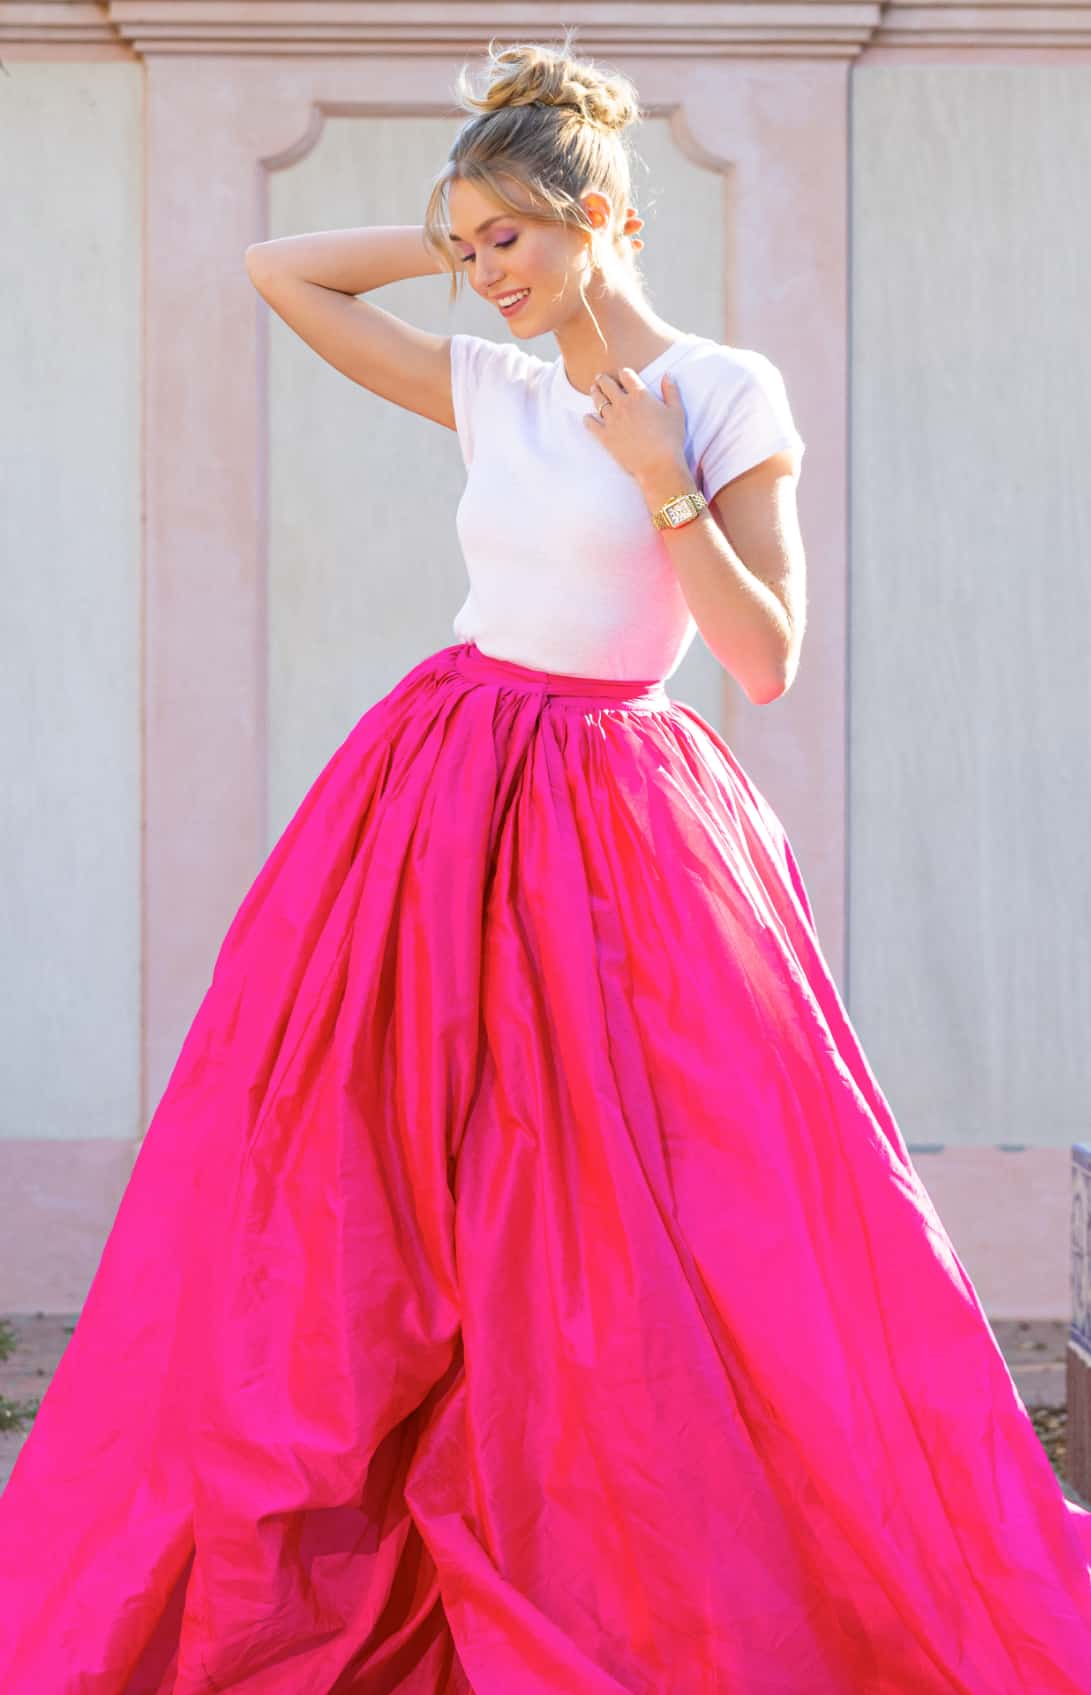 Woman wearing a white tee and a hot pink ball gown skirt wearing a MICHELE watch